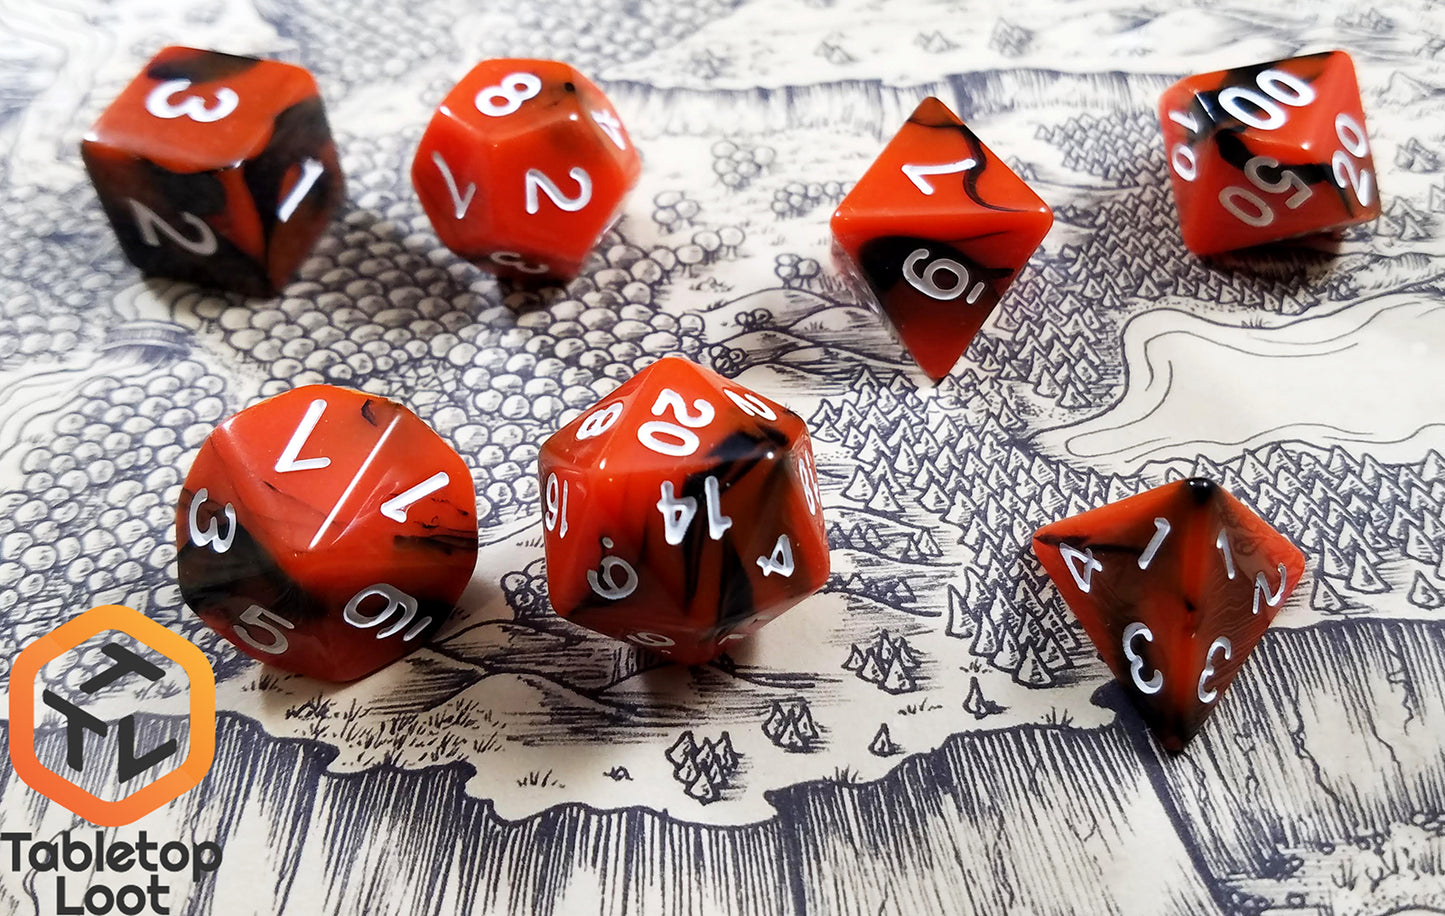 The Lava Flow 7 piece dice set from Tabletop Loot with swirls of black and orange resin and white numbering.